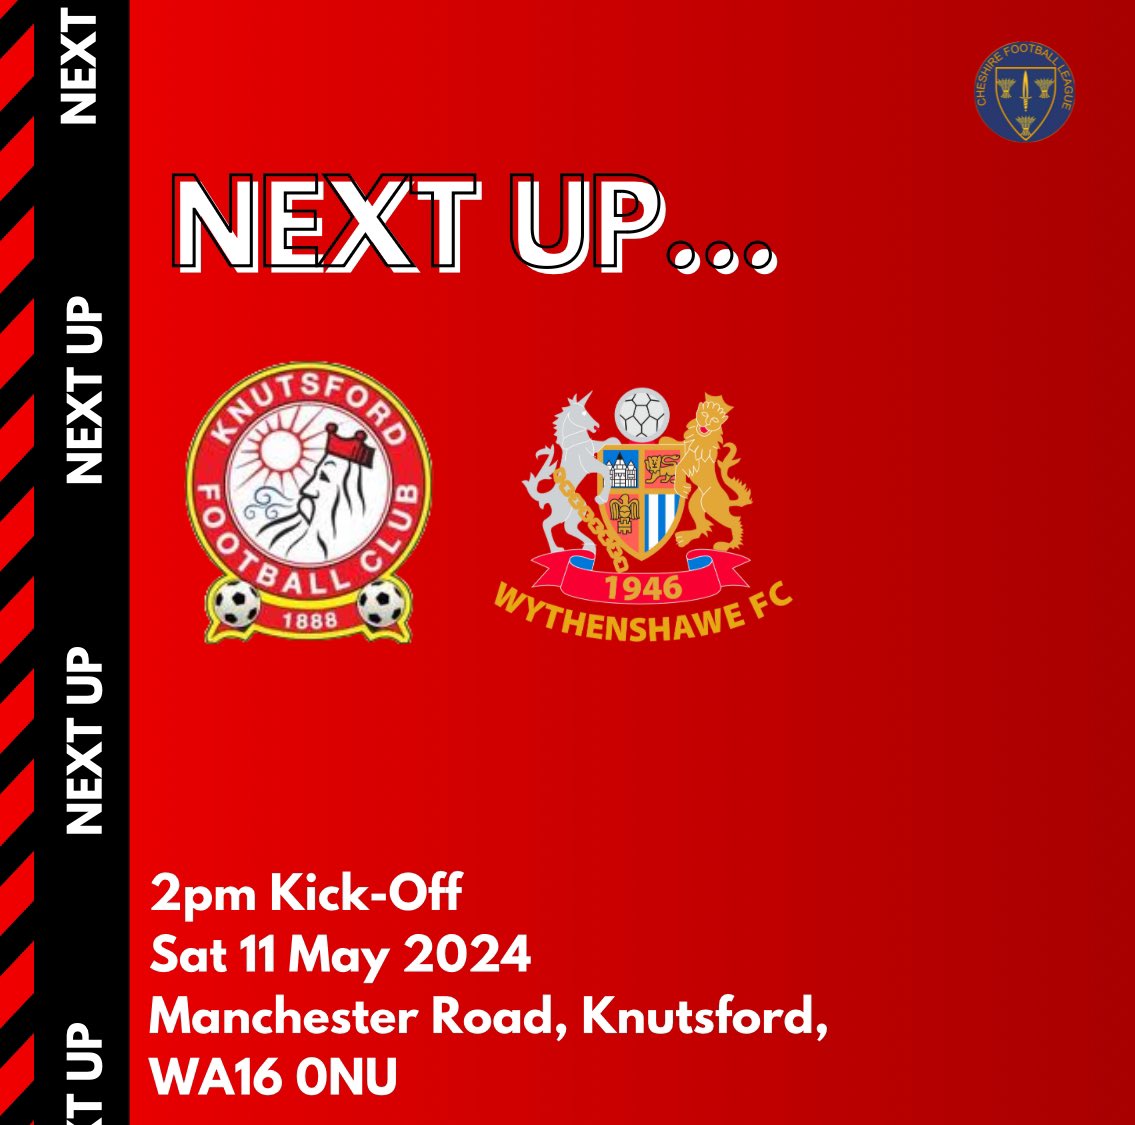 NEXT UP…

This Saturday we make the trip to @KnutsfordFC 

A win would secure safety from relegation so we would love to see some familiar faces to cheer the lads on!

🎟️ Tickets: £2 (£1 concessions)

📍Knutsford FC, Manchester Rd, Knutsford WA16 0NU

⚽️ 2PM

#UpTheAmmies 🔵⚪️